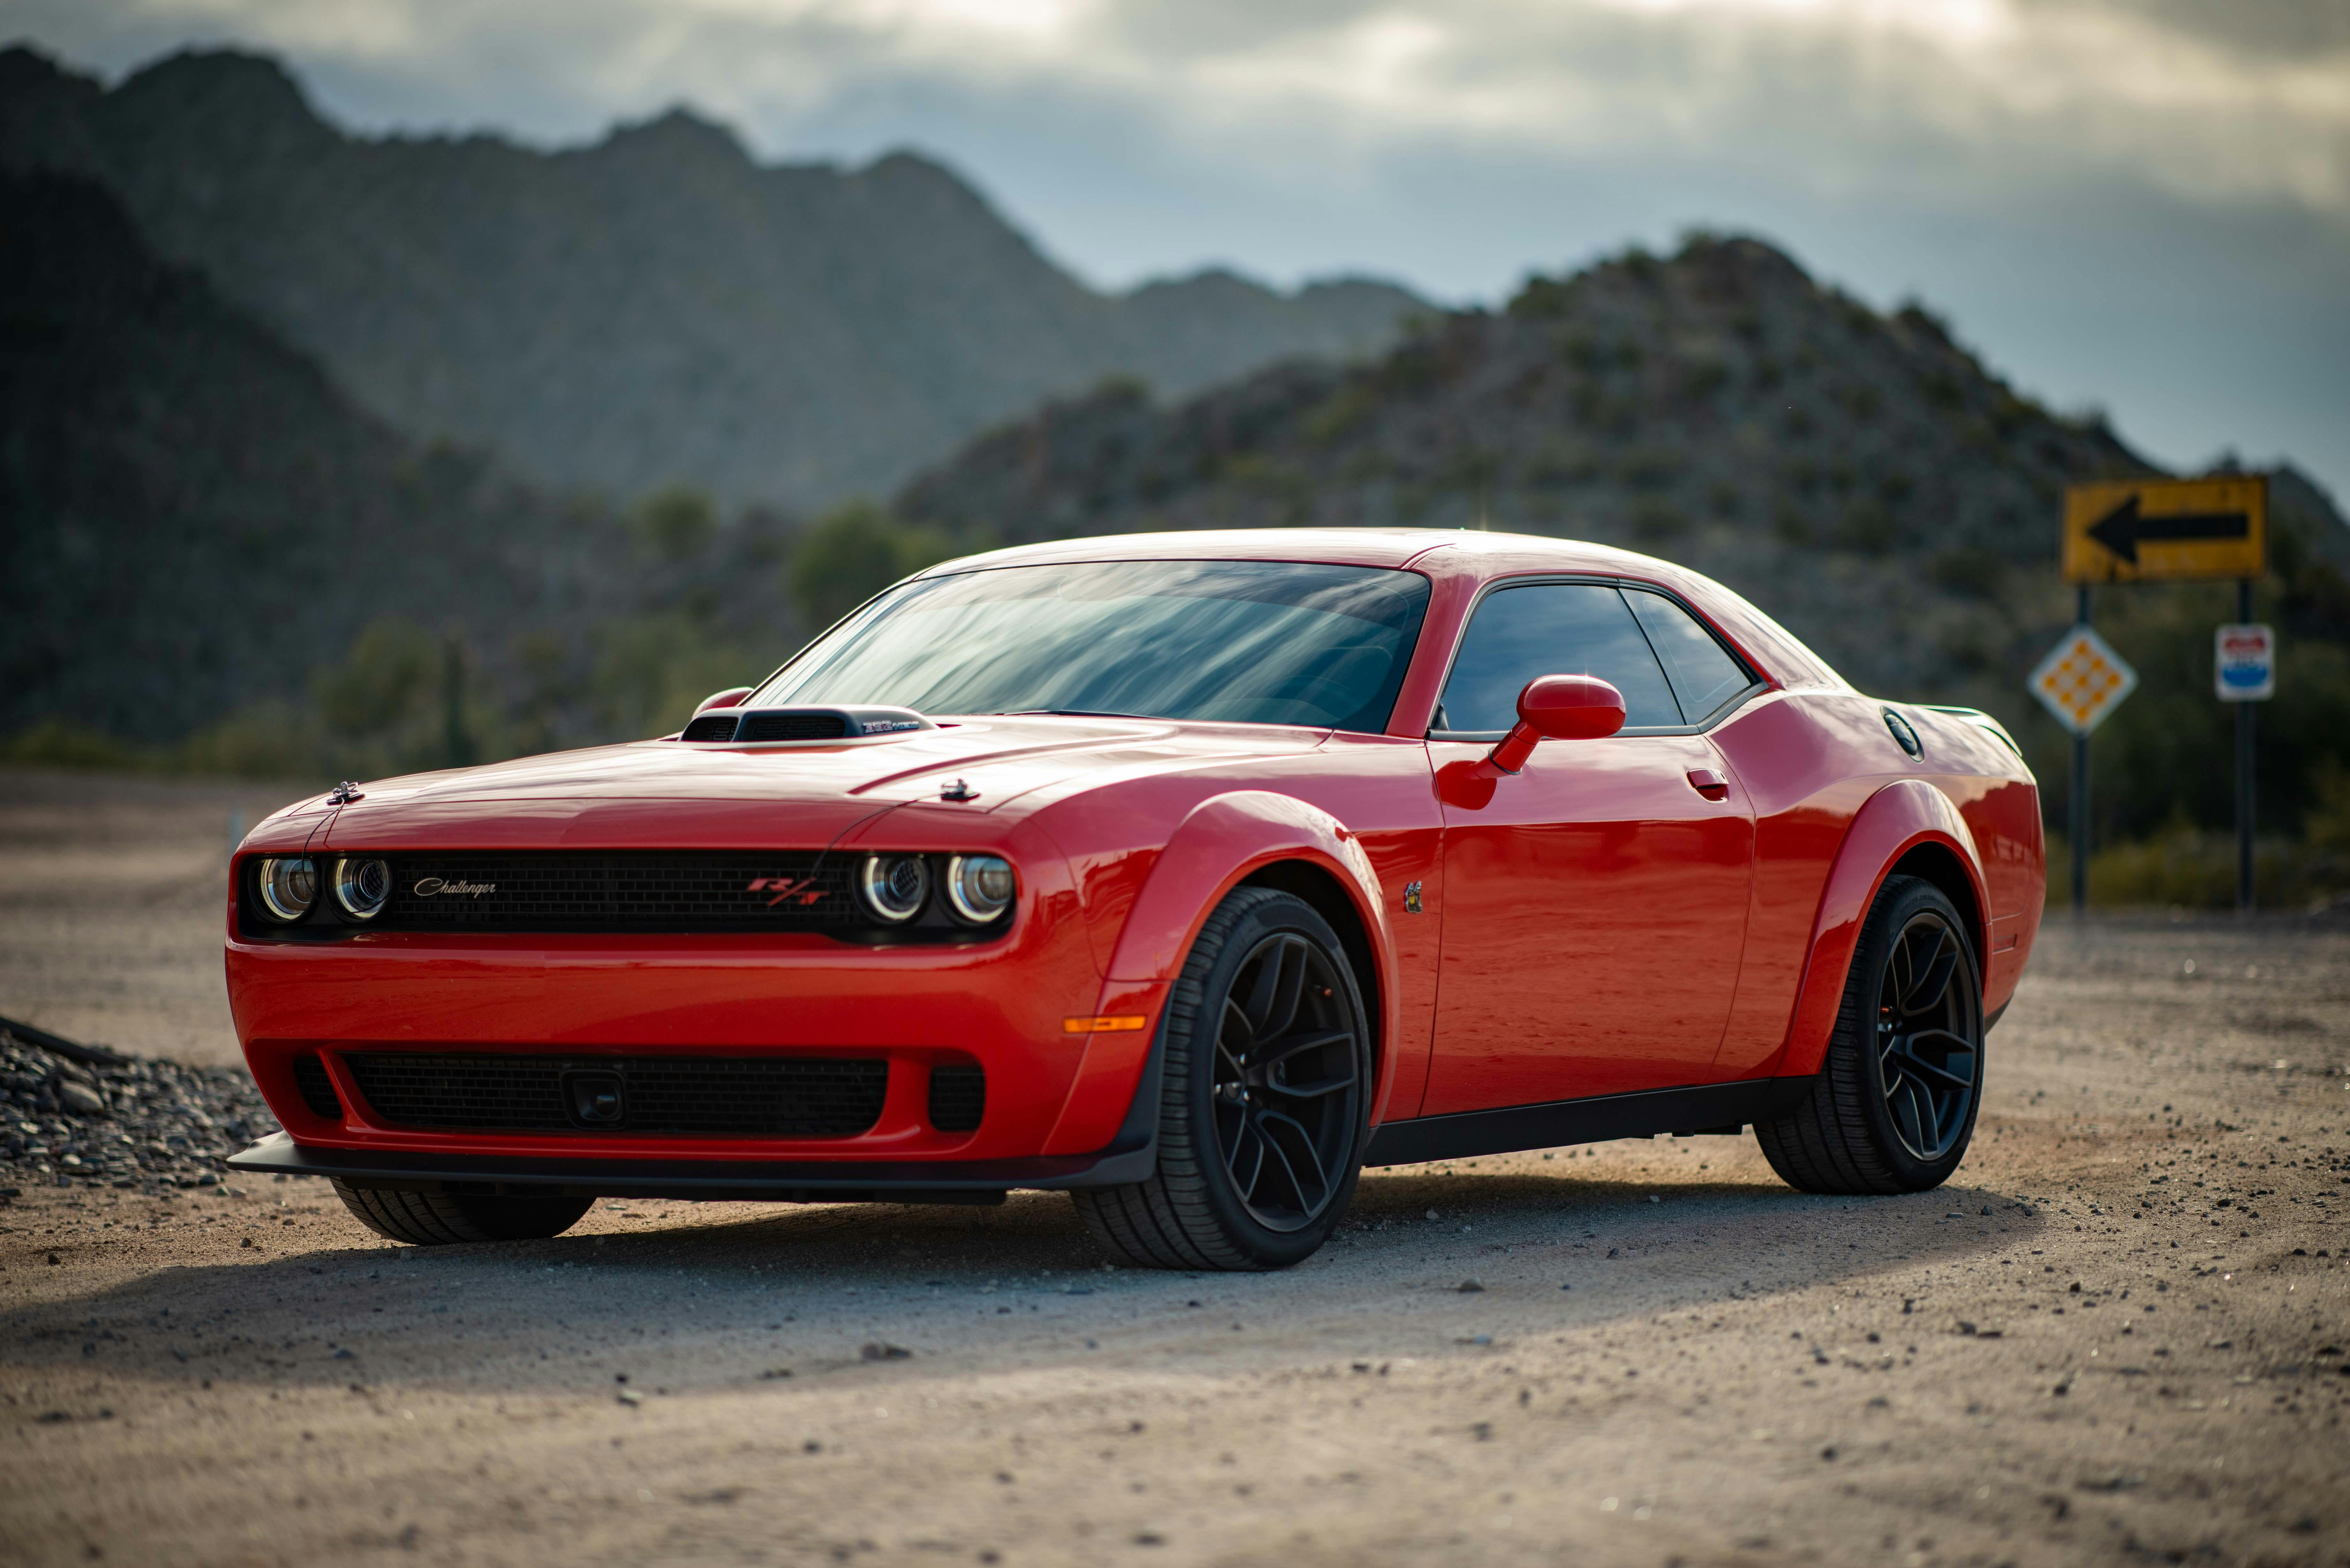 Red Dodge Challenger Parked on Unpaved Road · Free Stock Photo